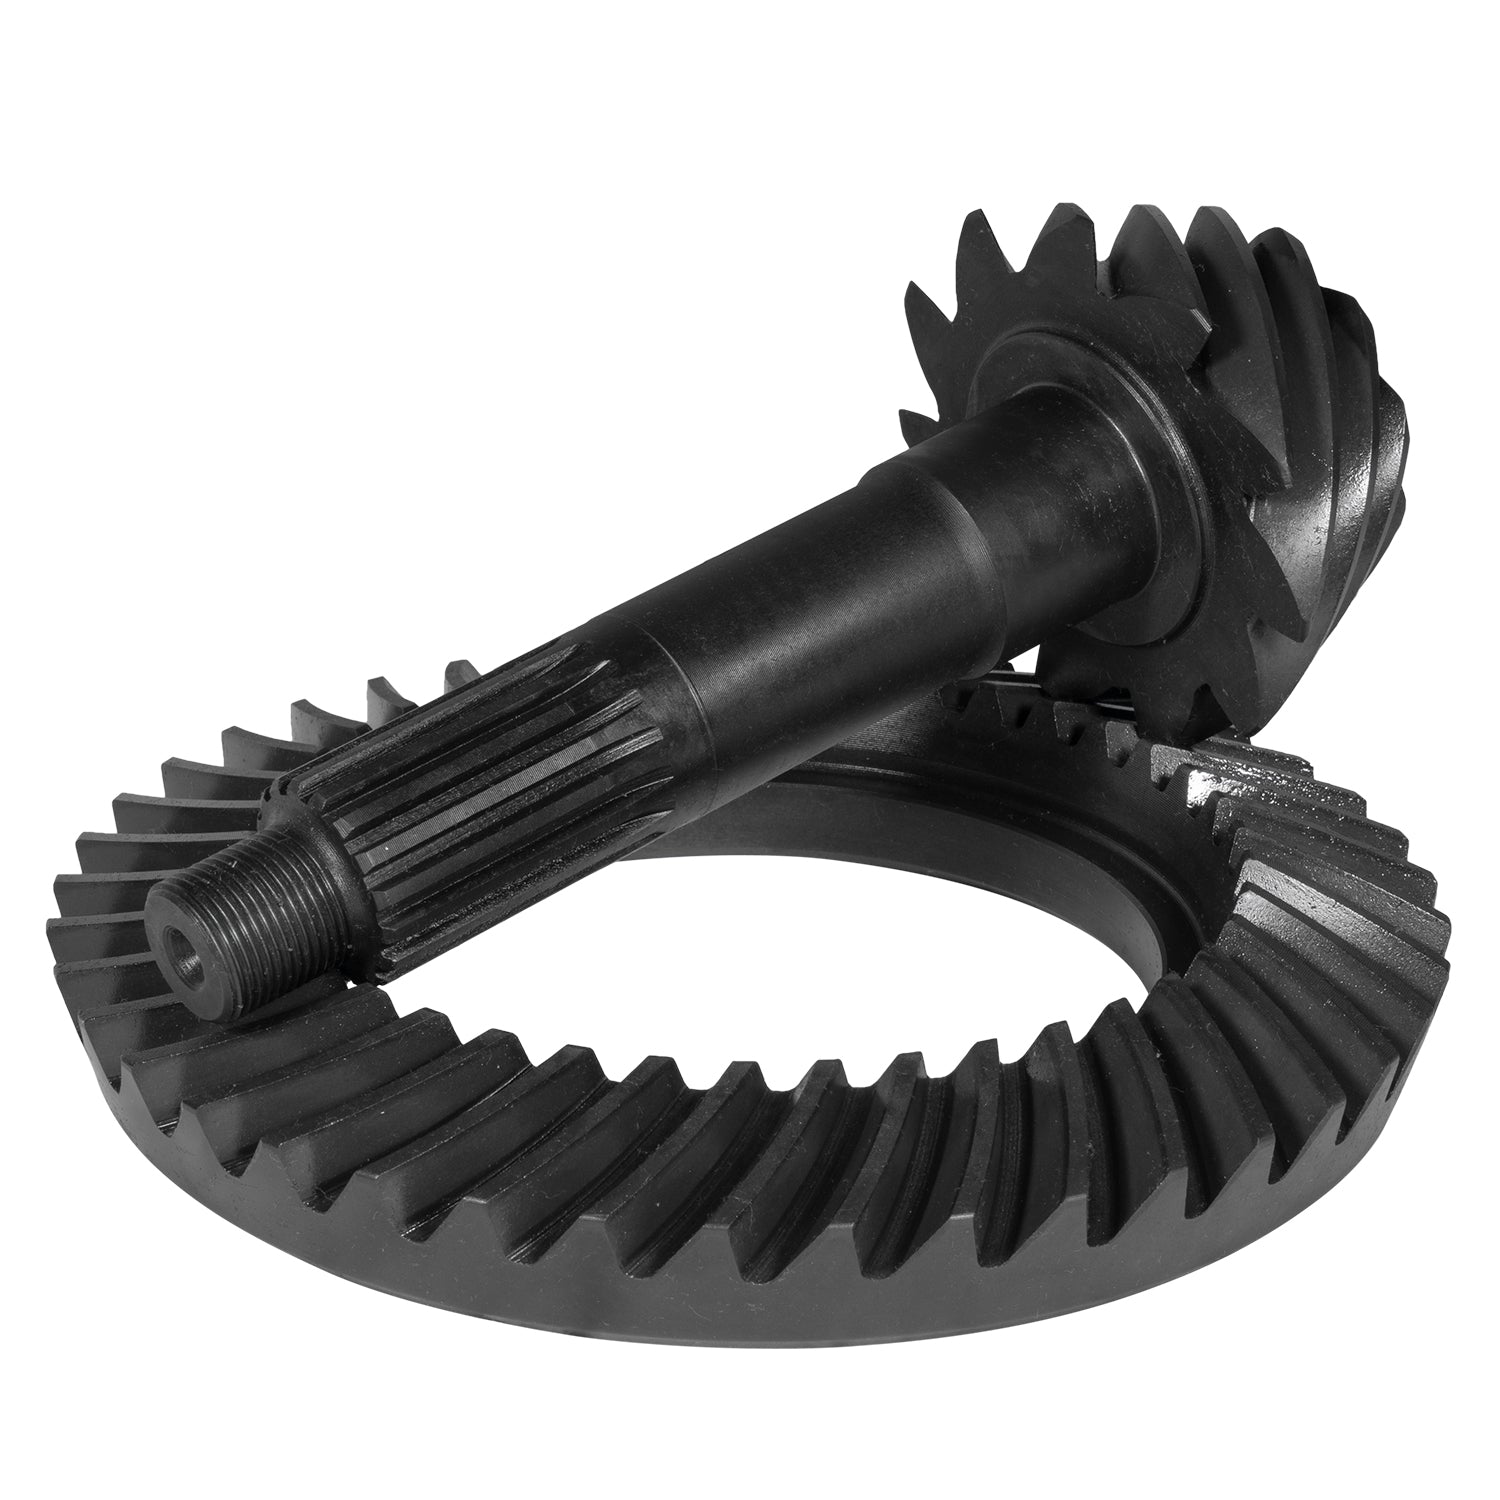 Yukon Gear Chevrolet Differential Ring and Pinion Kit - Rear YGK2370